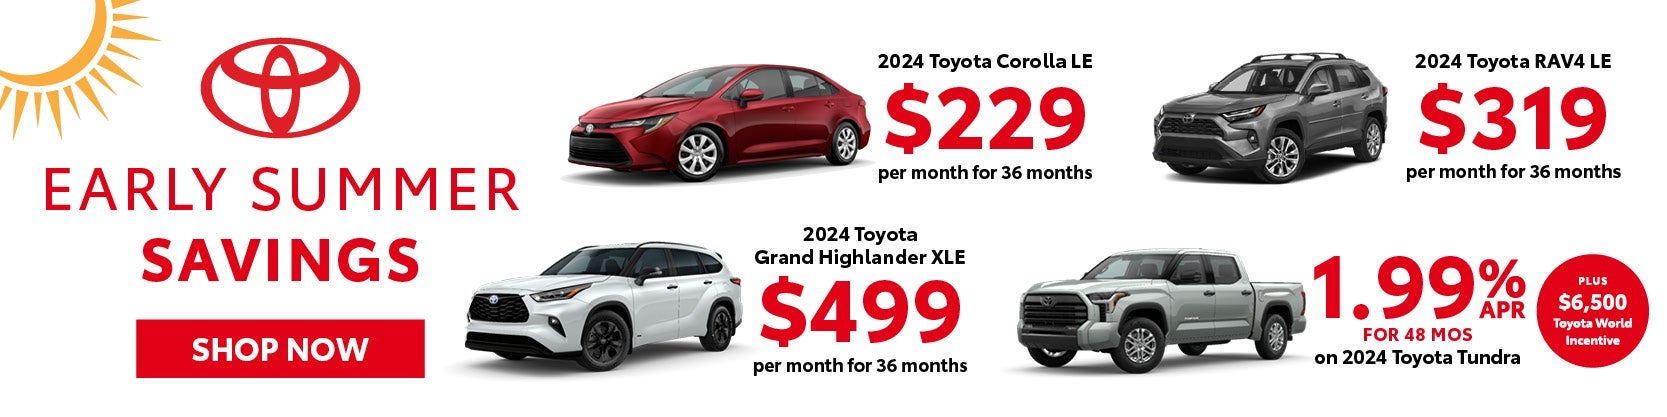 Toyota World of Lakewood April 24 Lease Banner Mobile